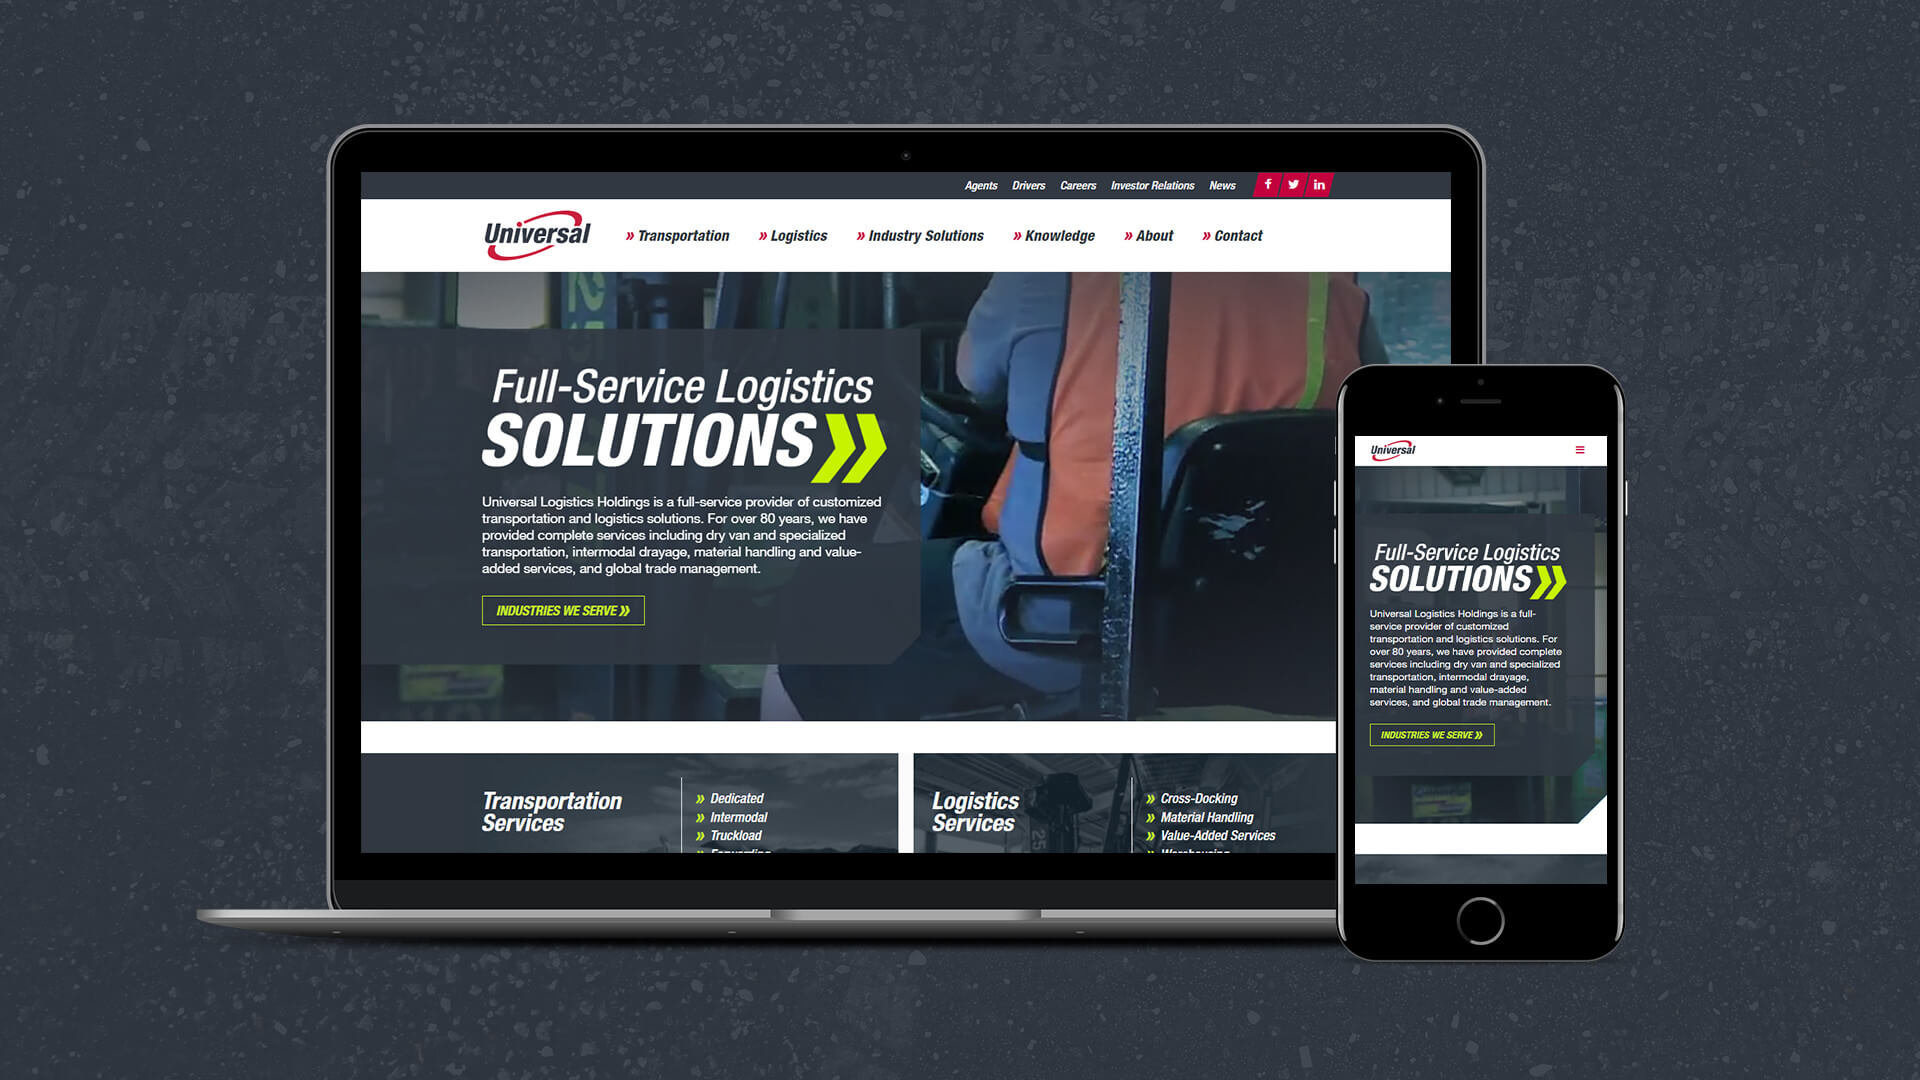 We launched the all new website to increase their brand recognition within the industry